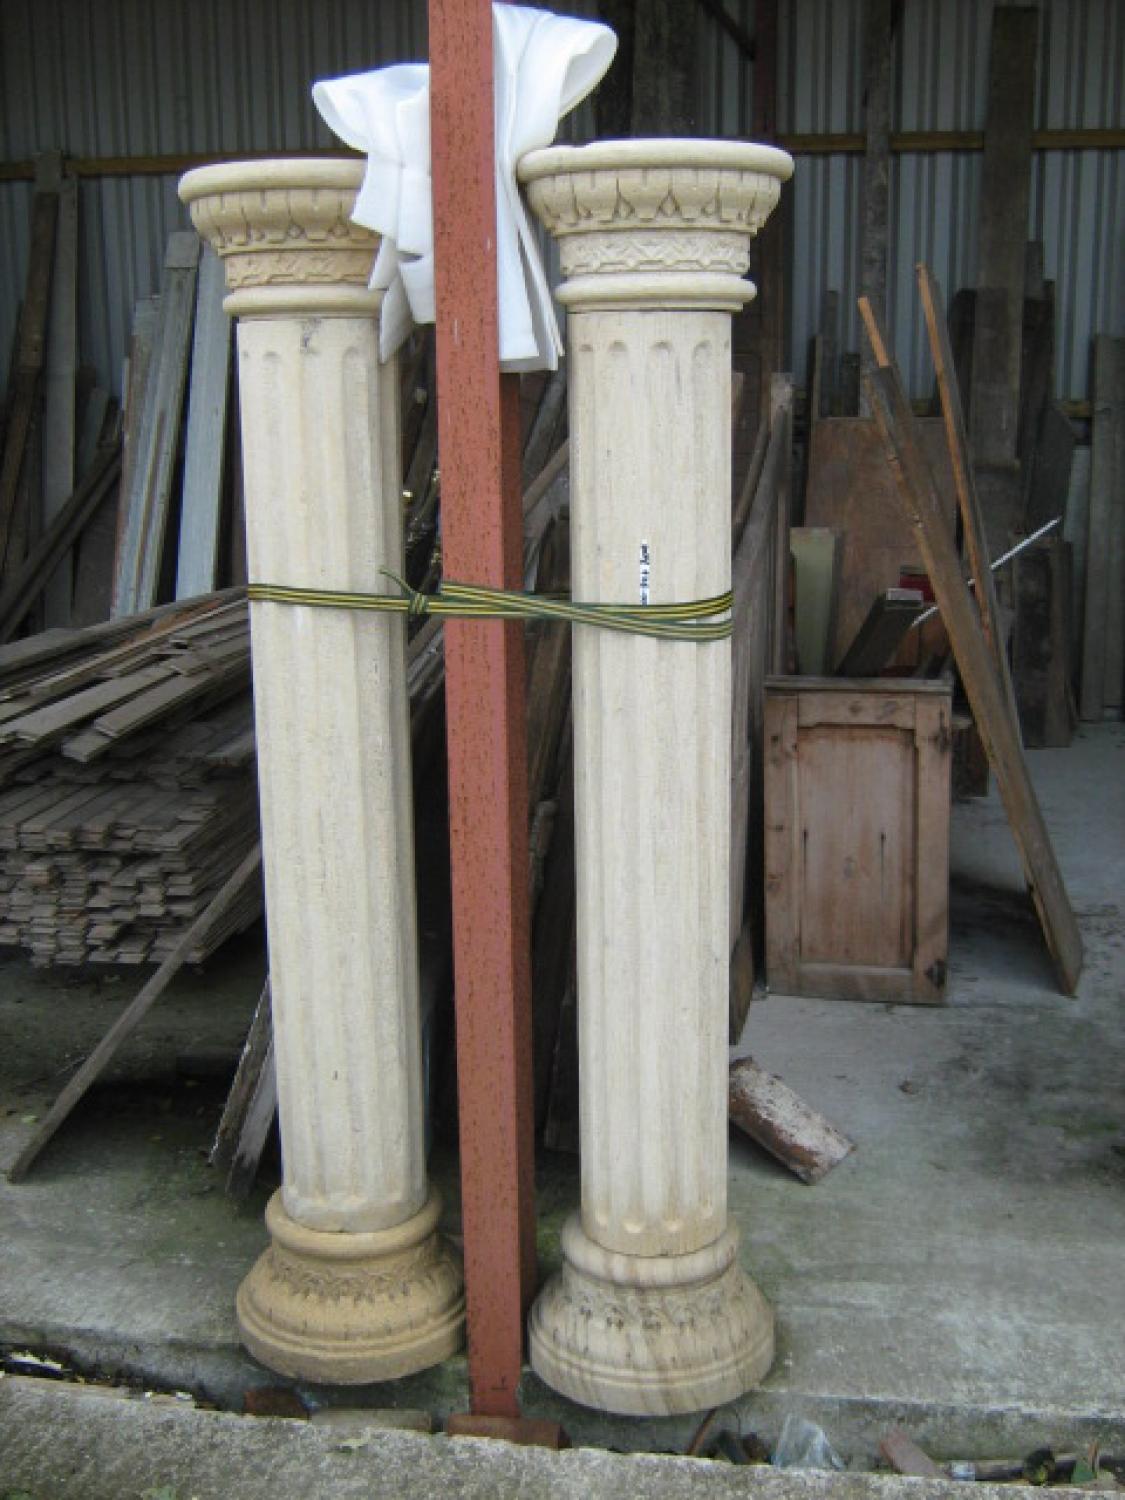 Pale sandstone, carved detail to capitals
Measure: Approximate 9½